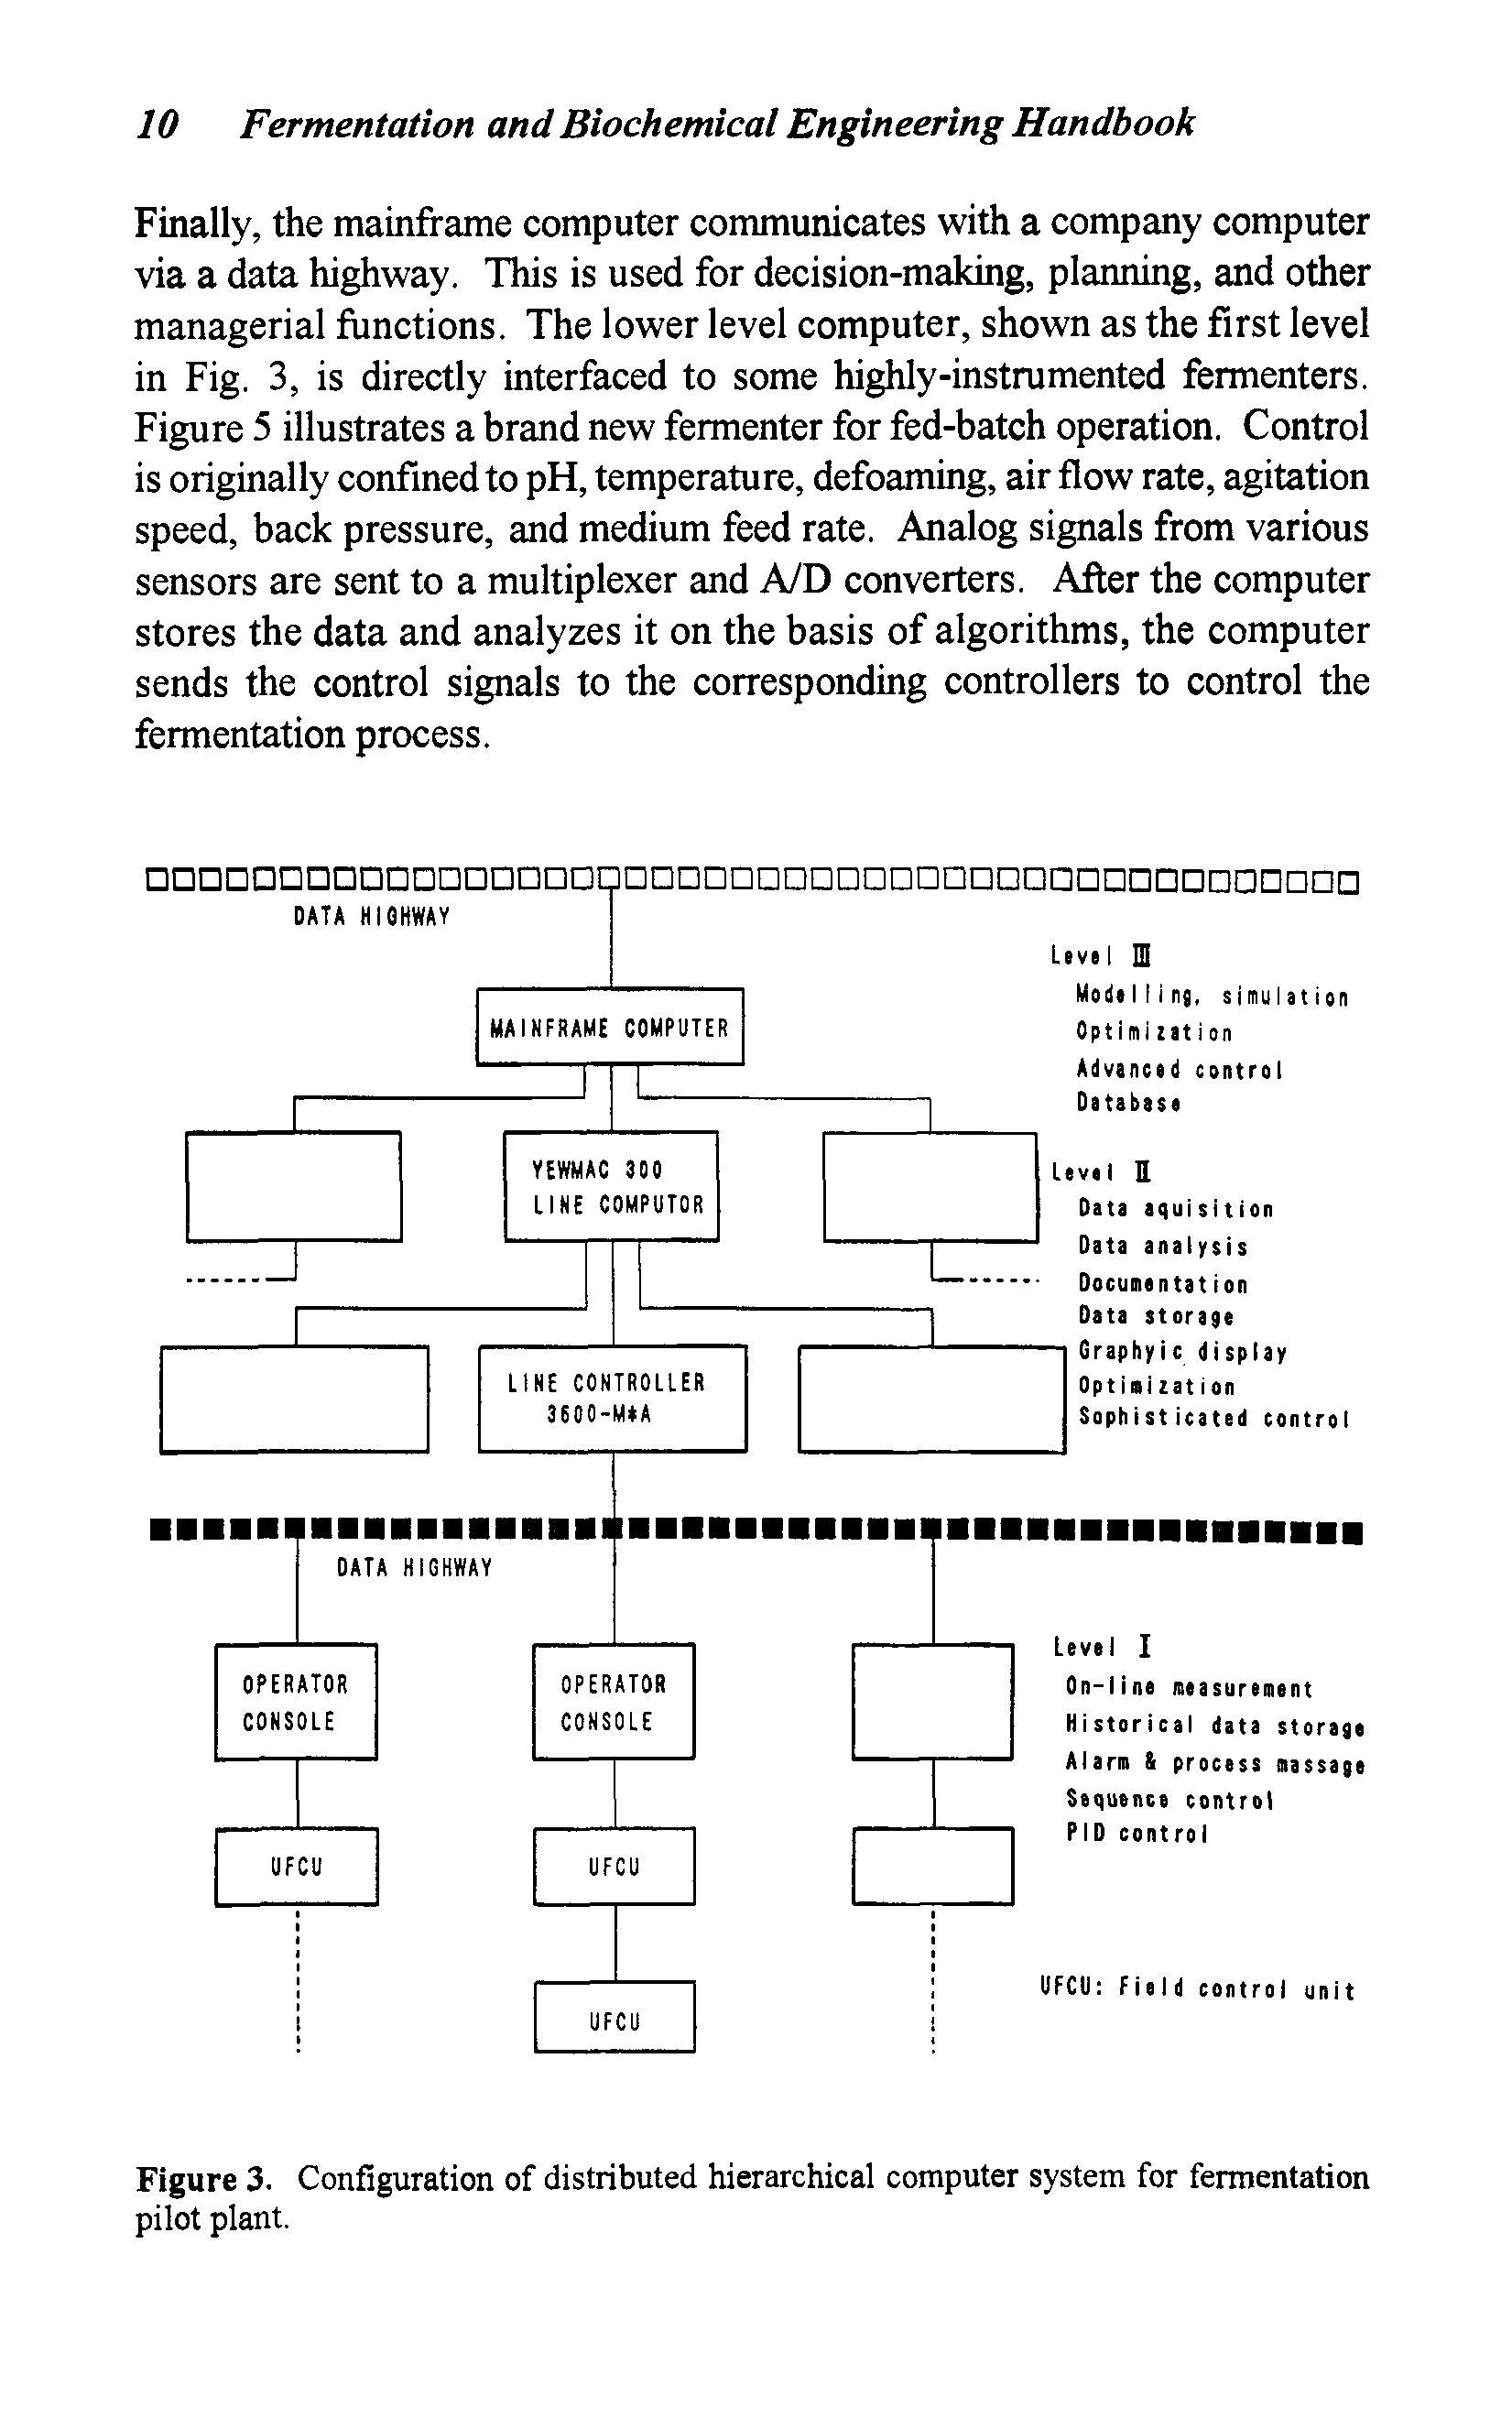 Figure 3. Configuration of distributed hierarchical computer system for fermentation pilot plant.